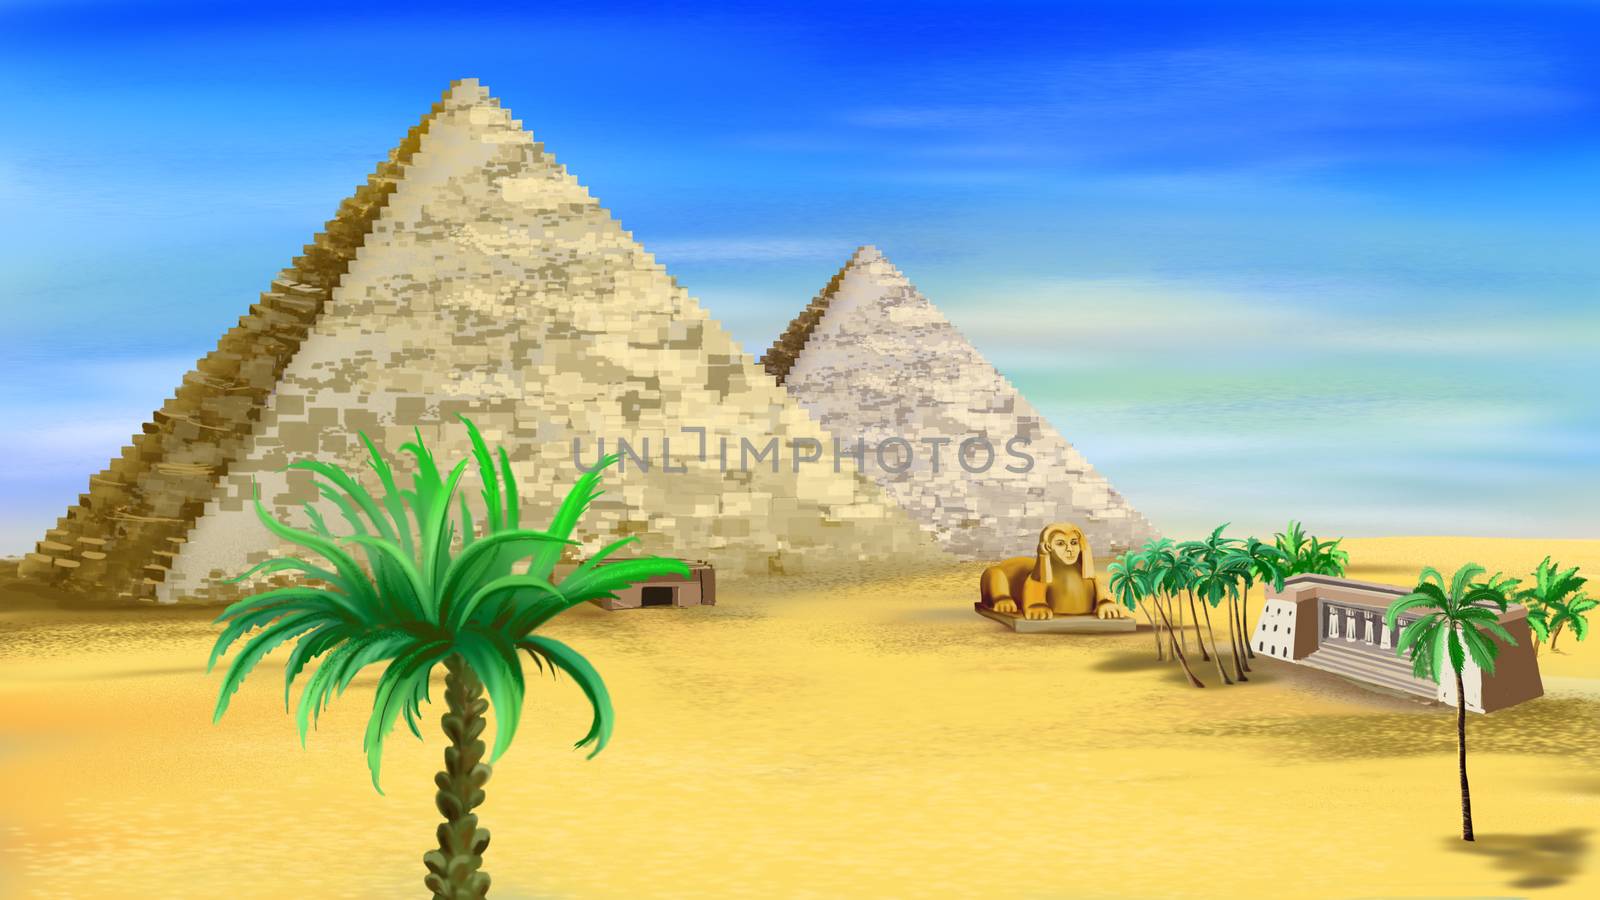 Digital painting of the Egyptian pyramids.